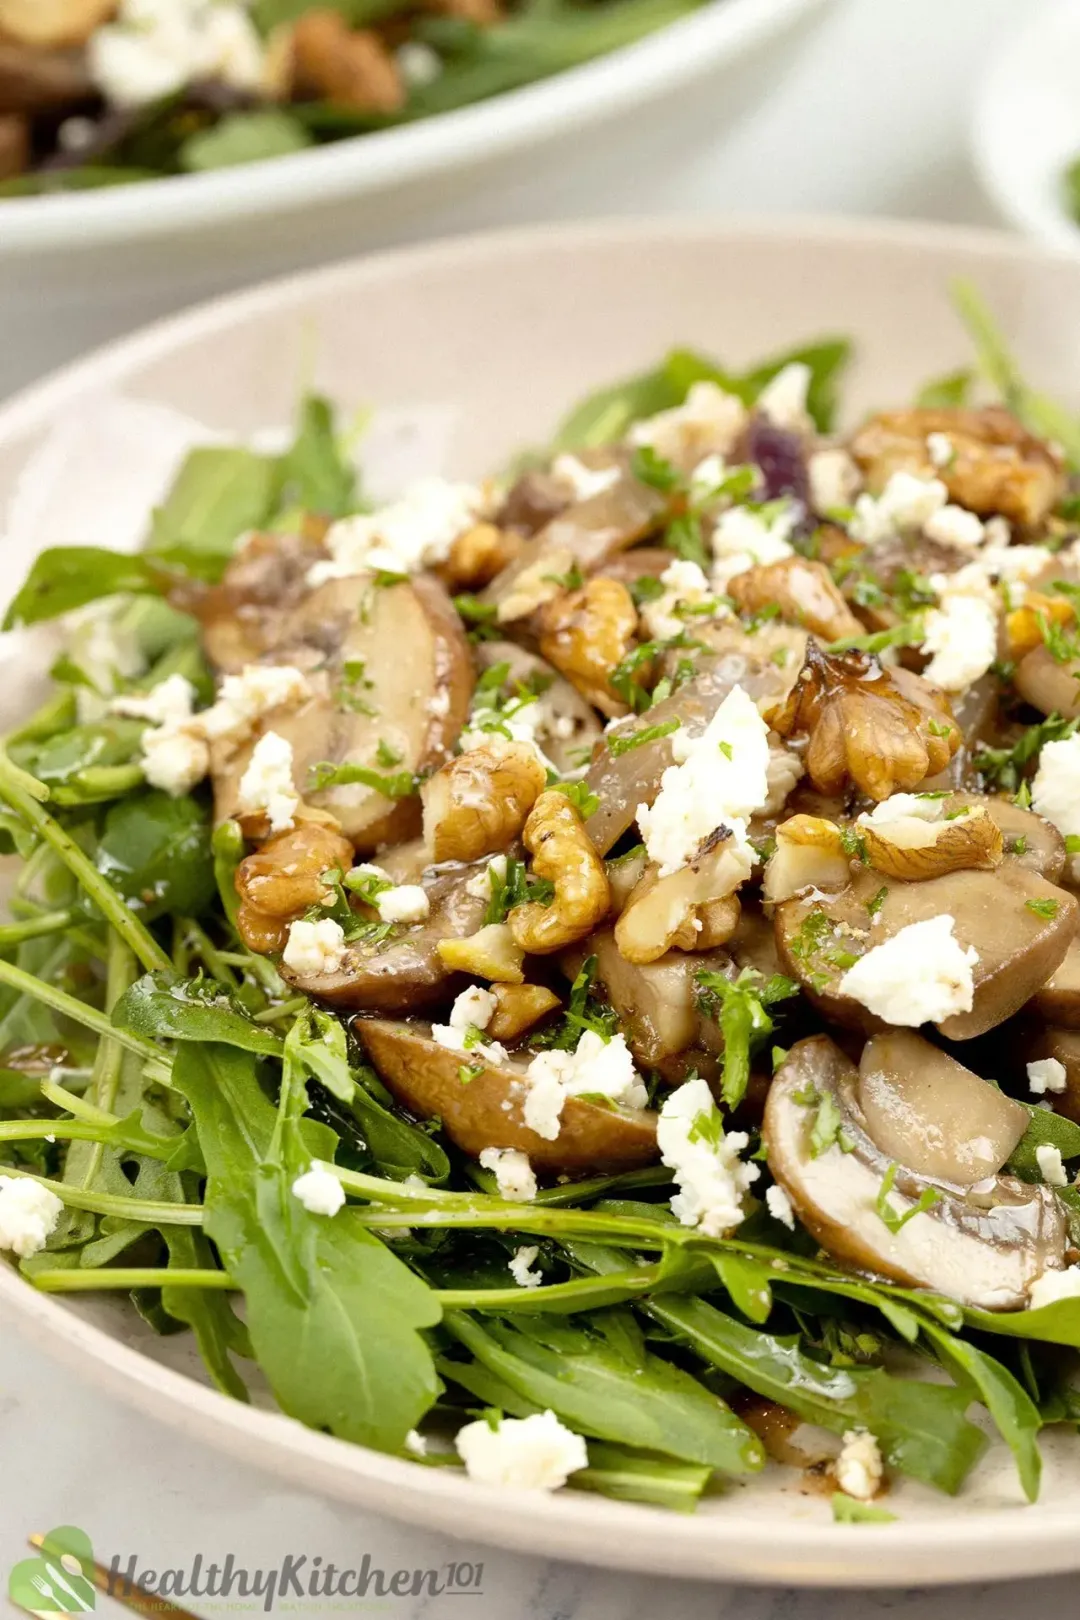 A bowl of mushroom salad with sliced mushrooms, walnuts, cheese, and dressing on top.